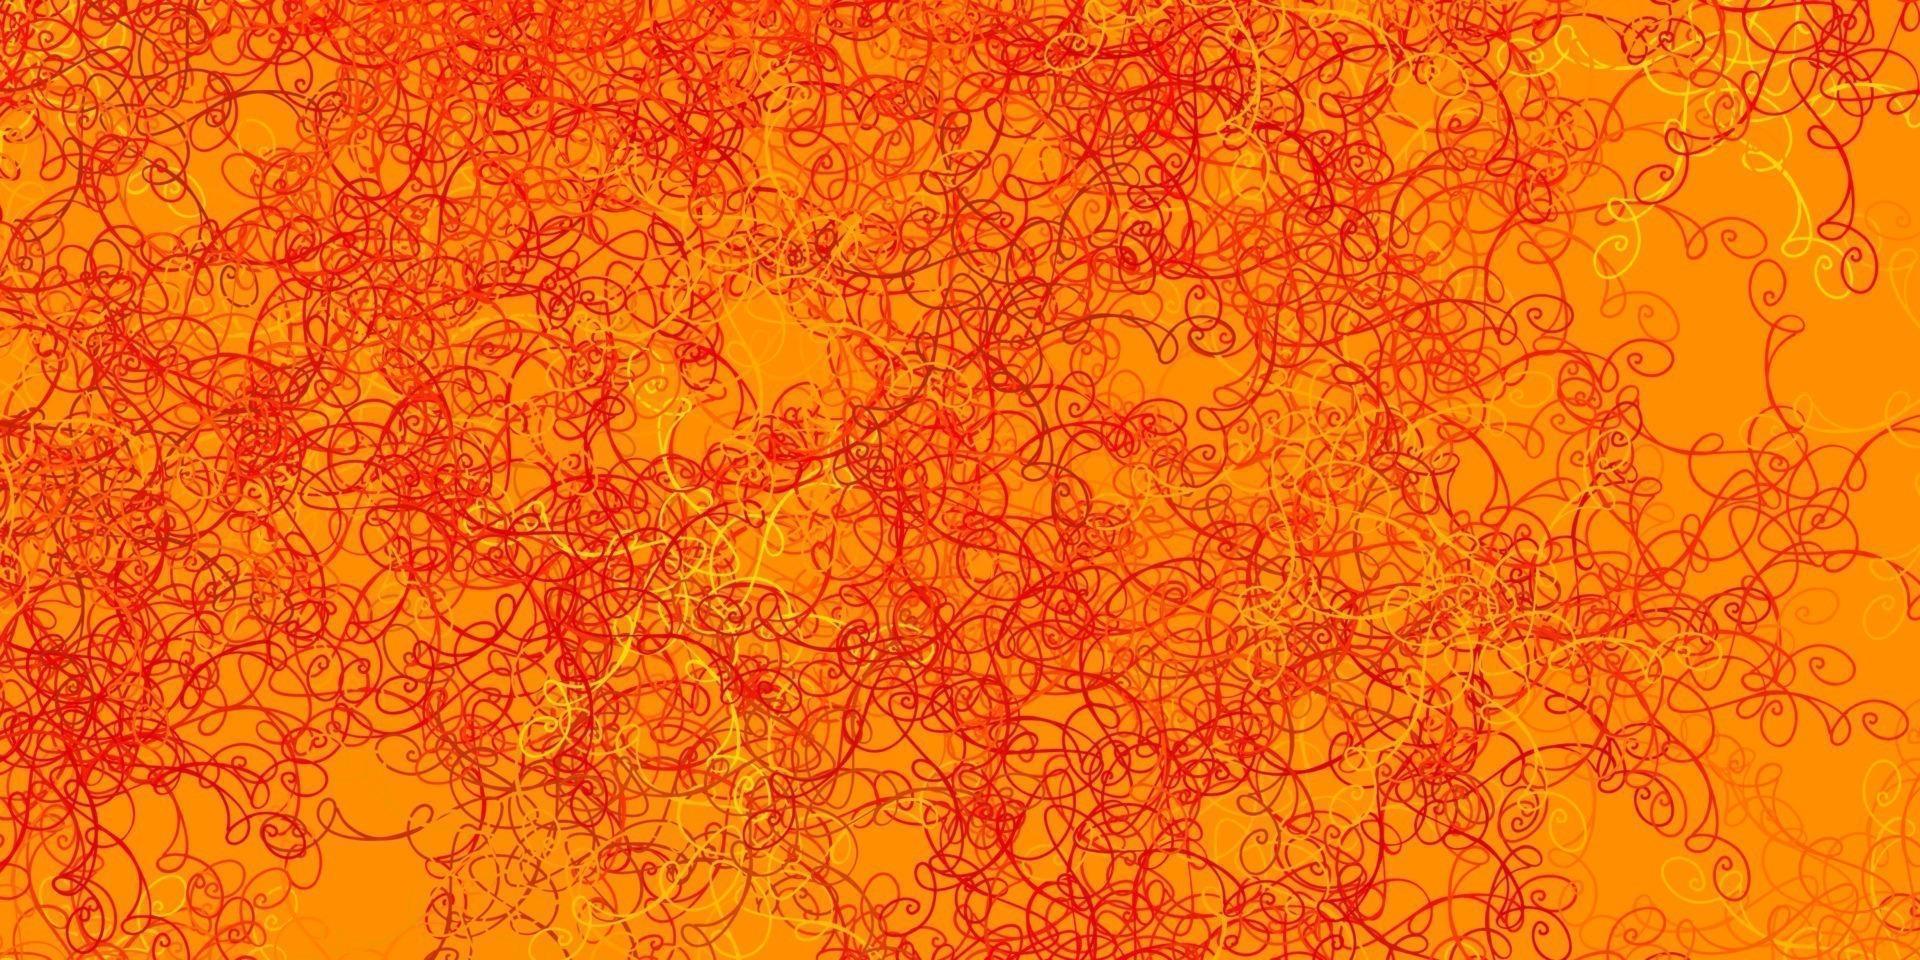 Light Orange vector background with bows.